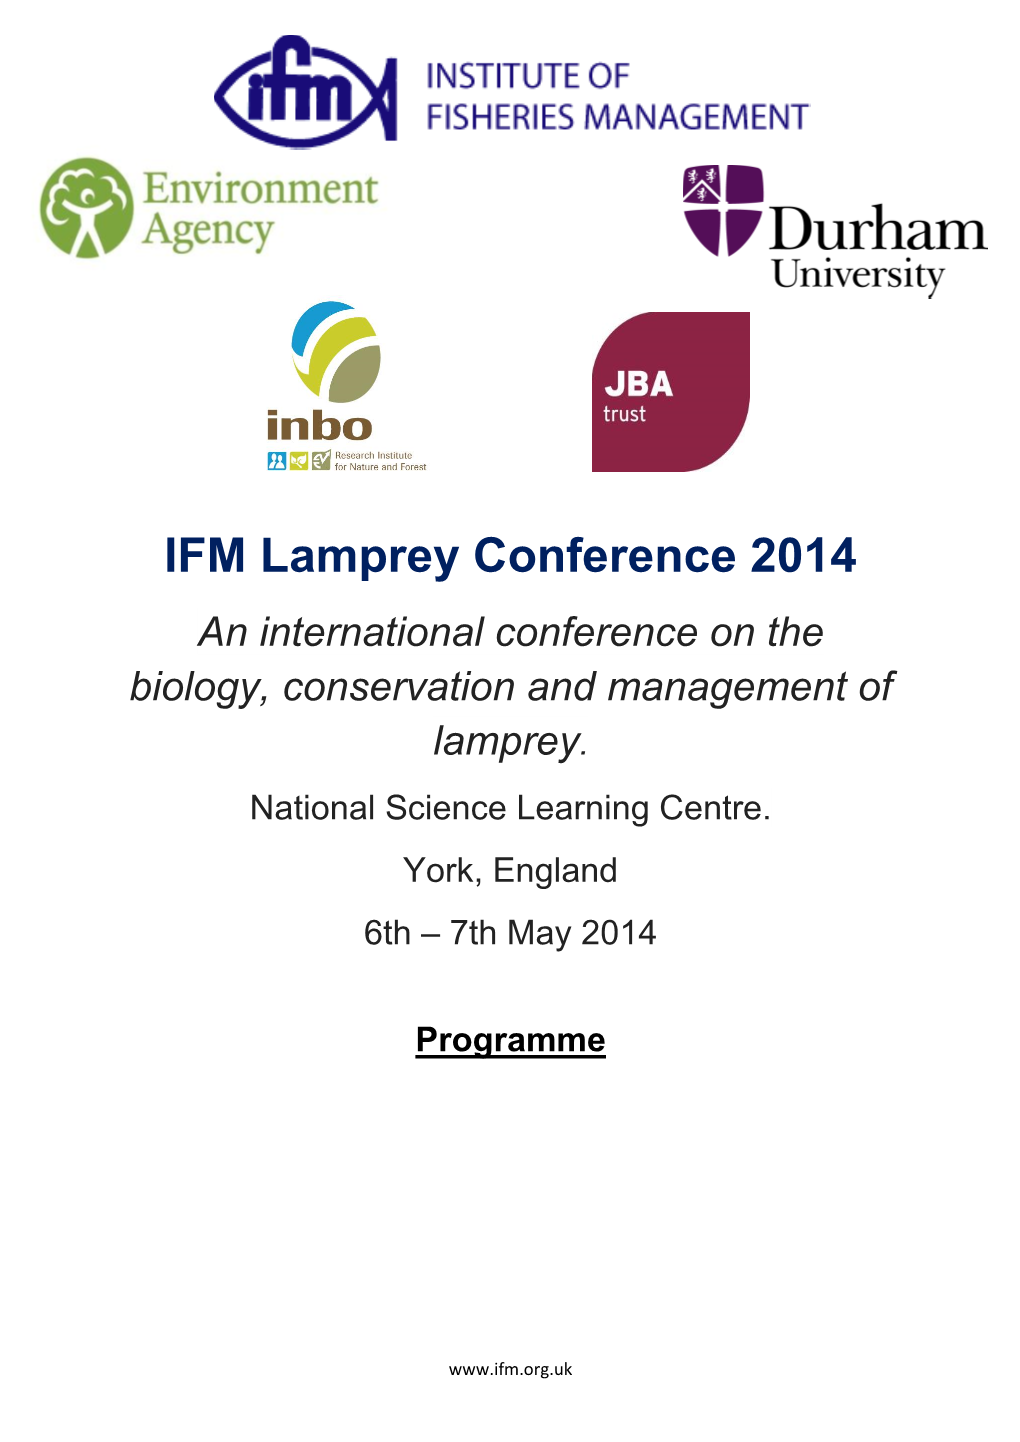 IFM 2014 Lamprey Conference Programme